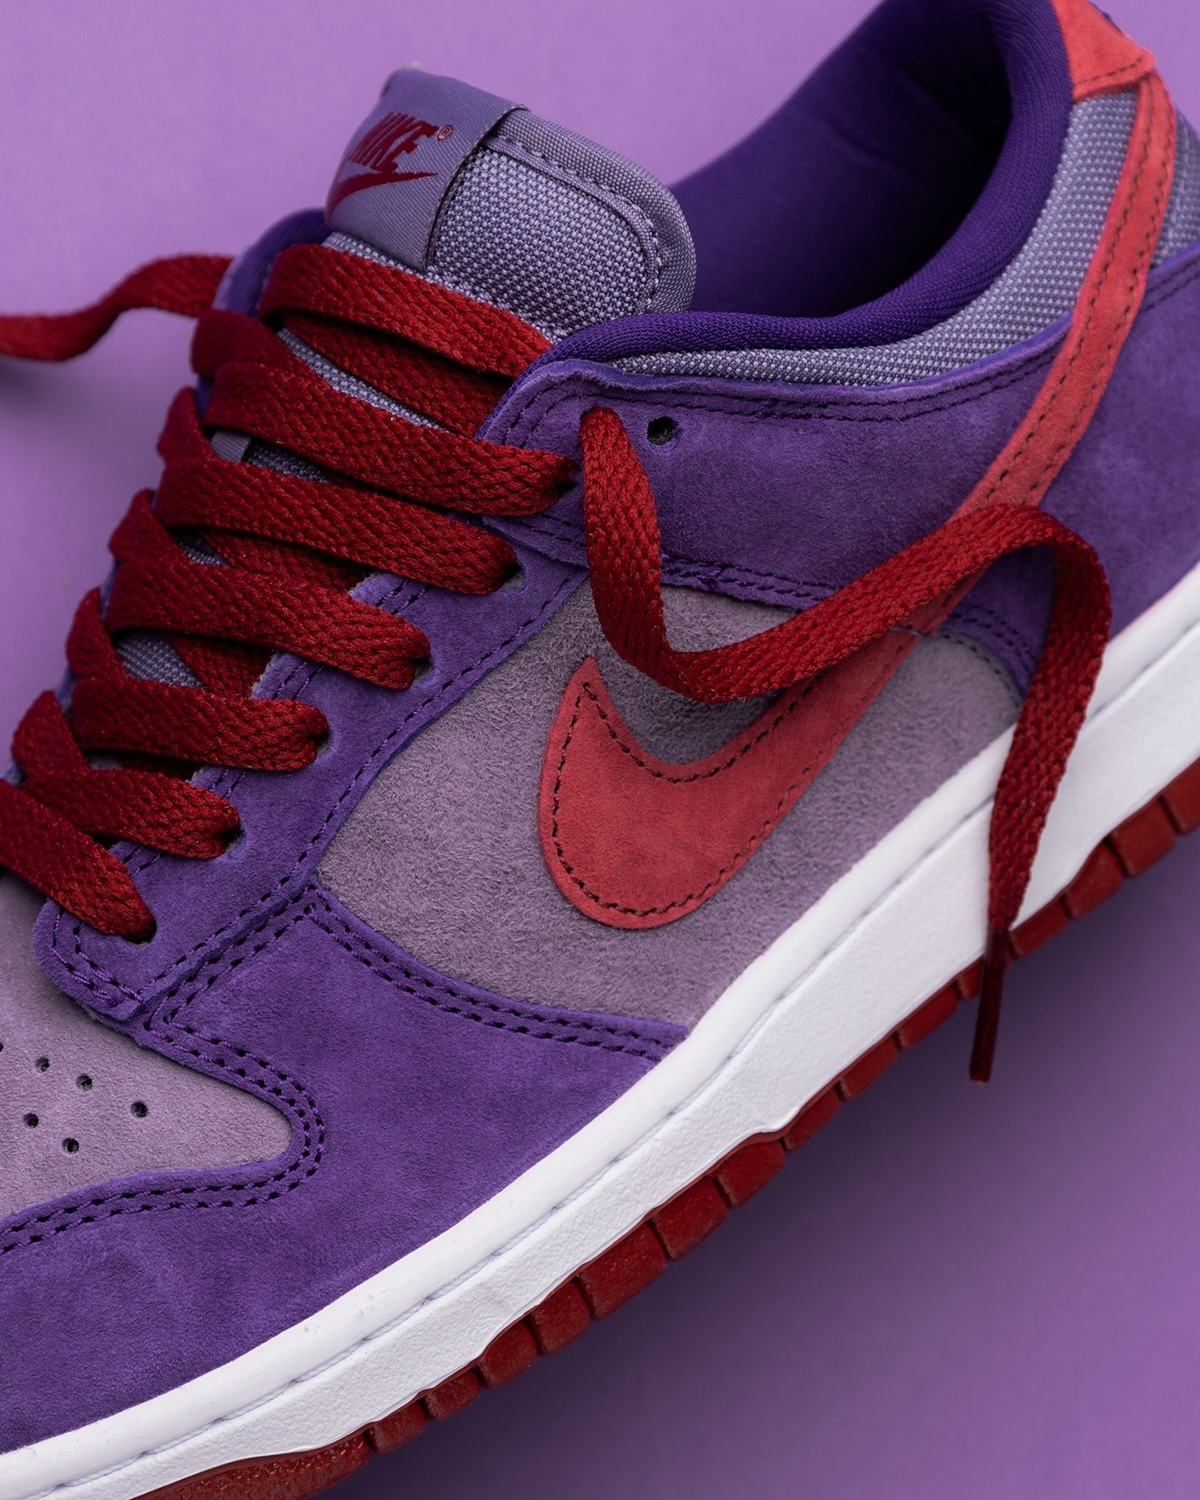 The shoes Flyknit upper delivers a good touch on the ball Plum Cu1726 500 Release Info 2